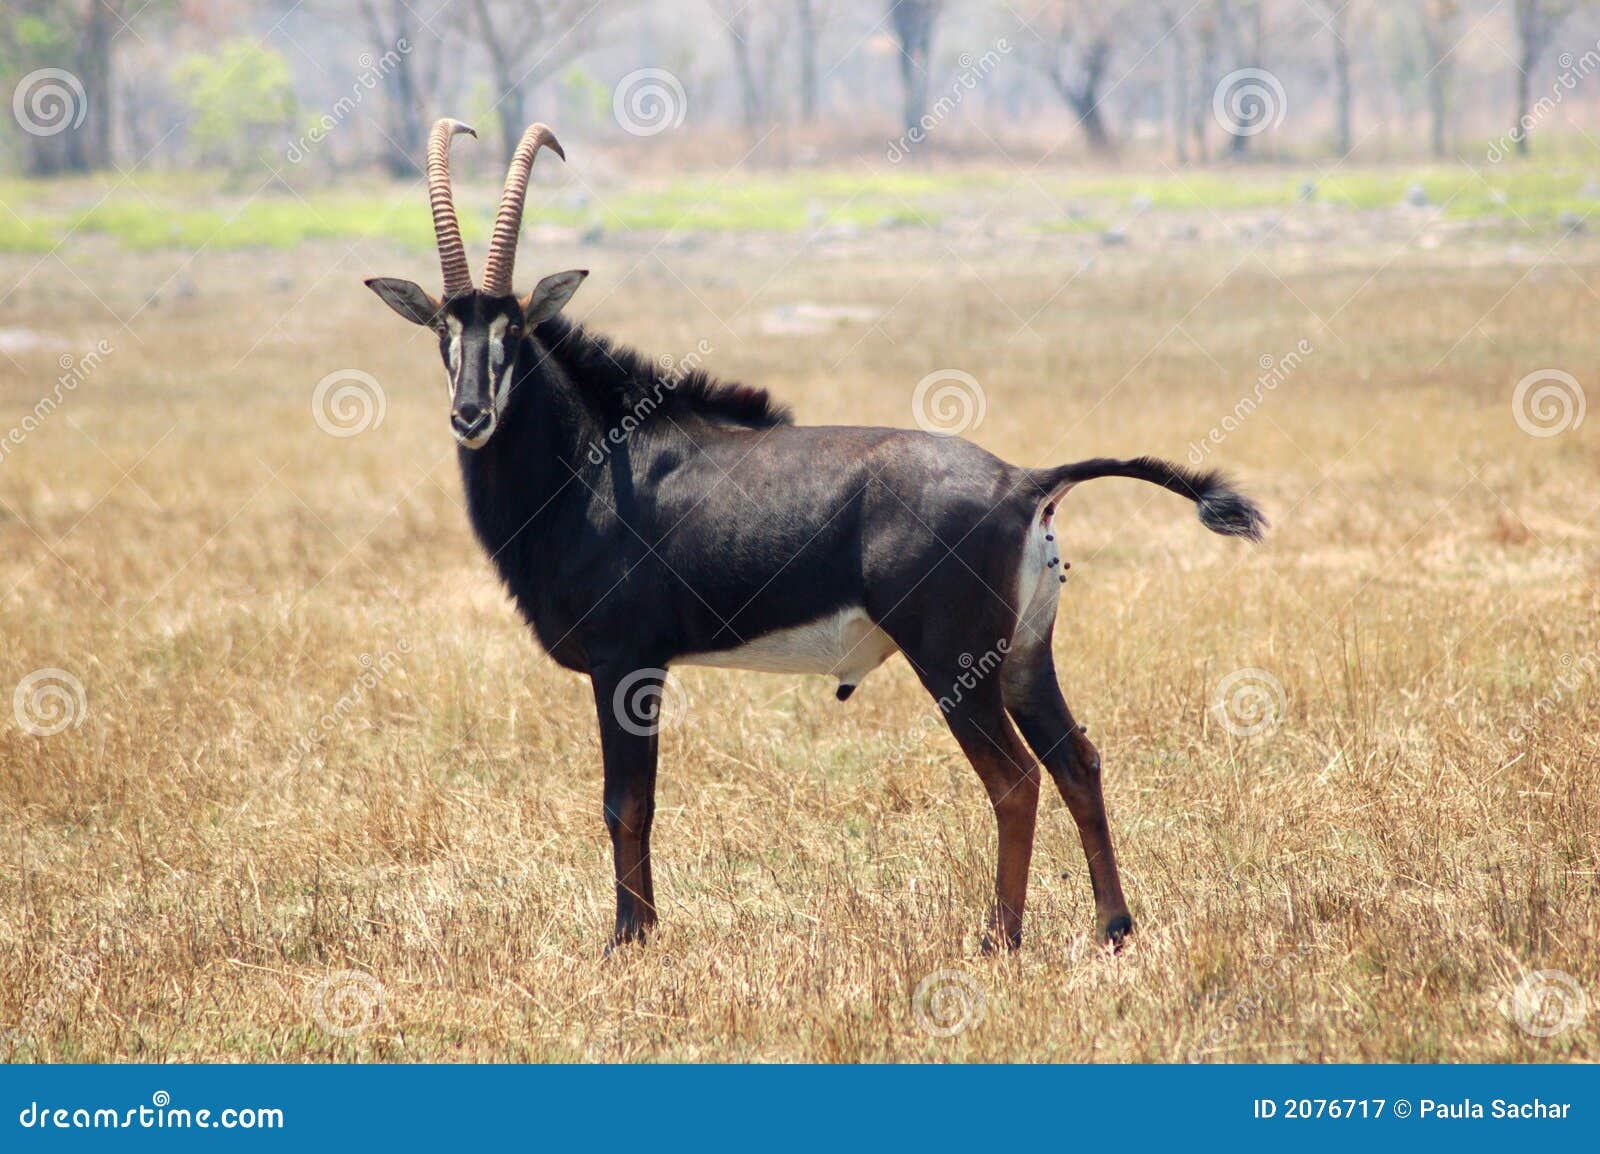 a lone sable male